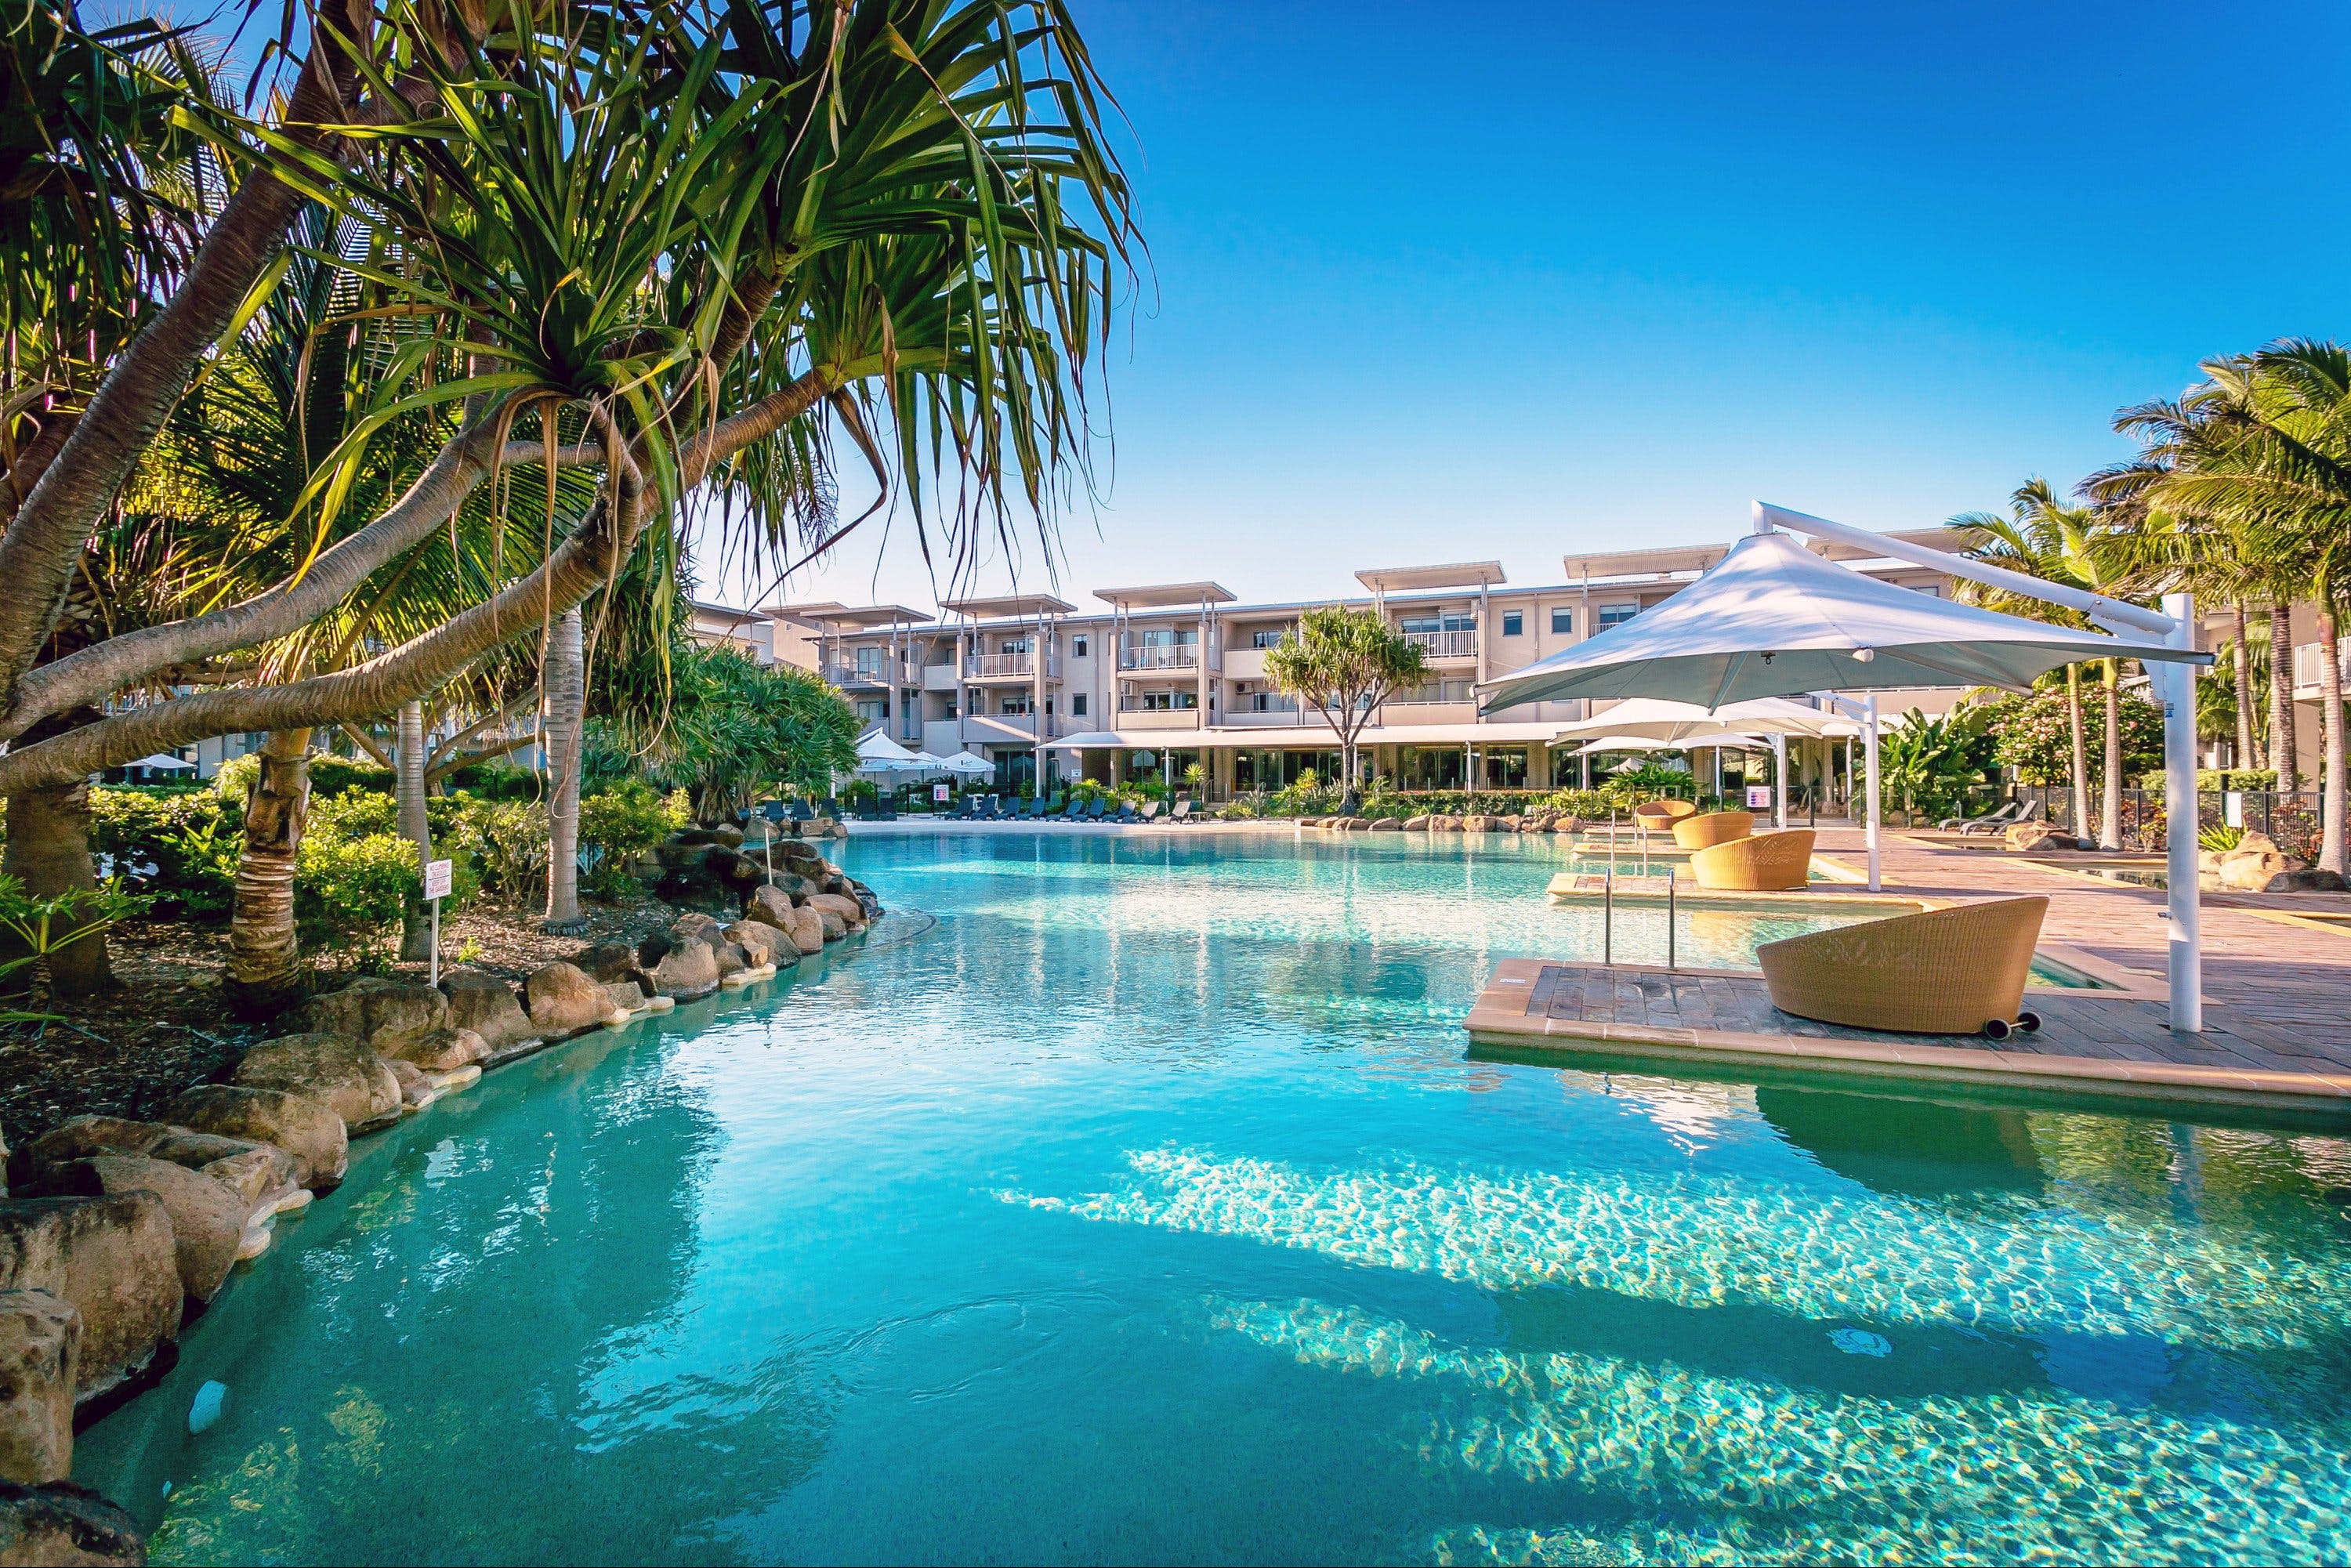 Peppers Salt Resort and Spa - Accommodation Mooloolaba